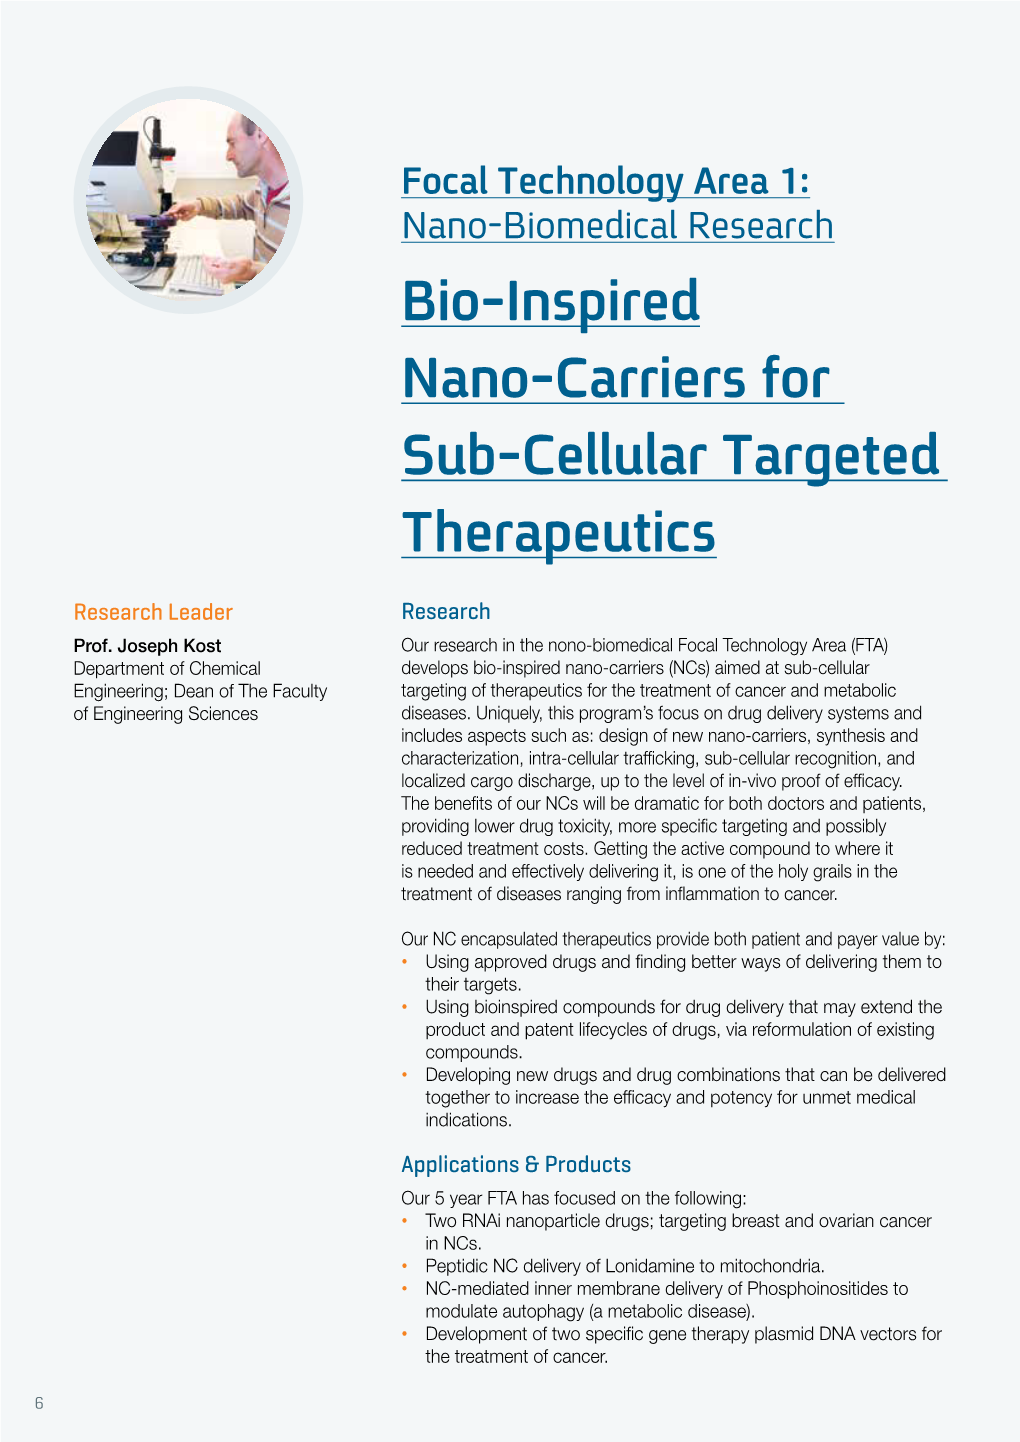 Bio-Inspired Nano-Carriers for Sub-Cellular Targeted Therapeutics